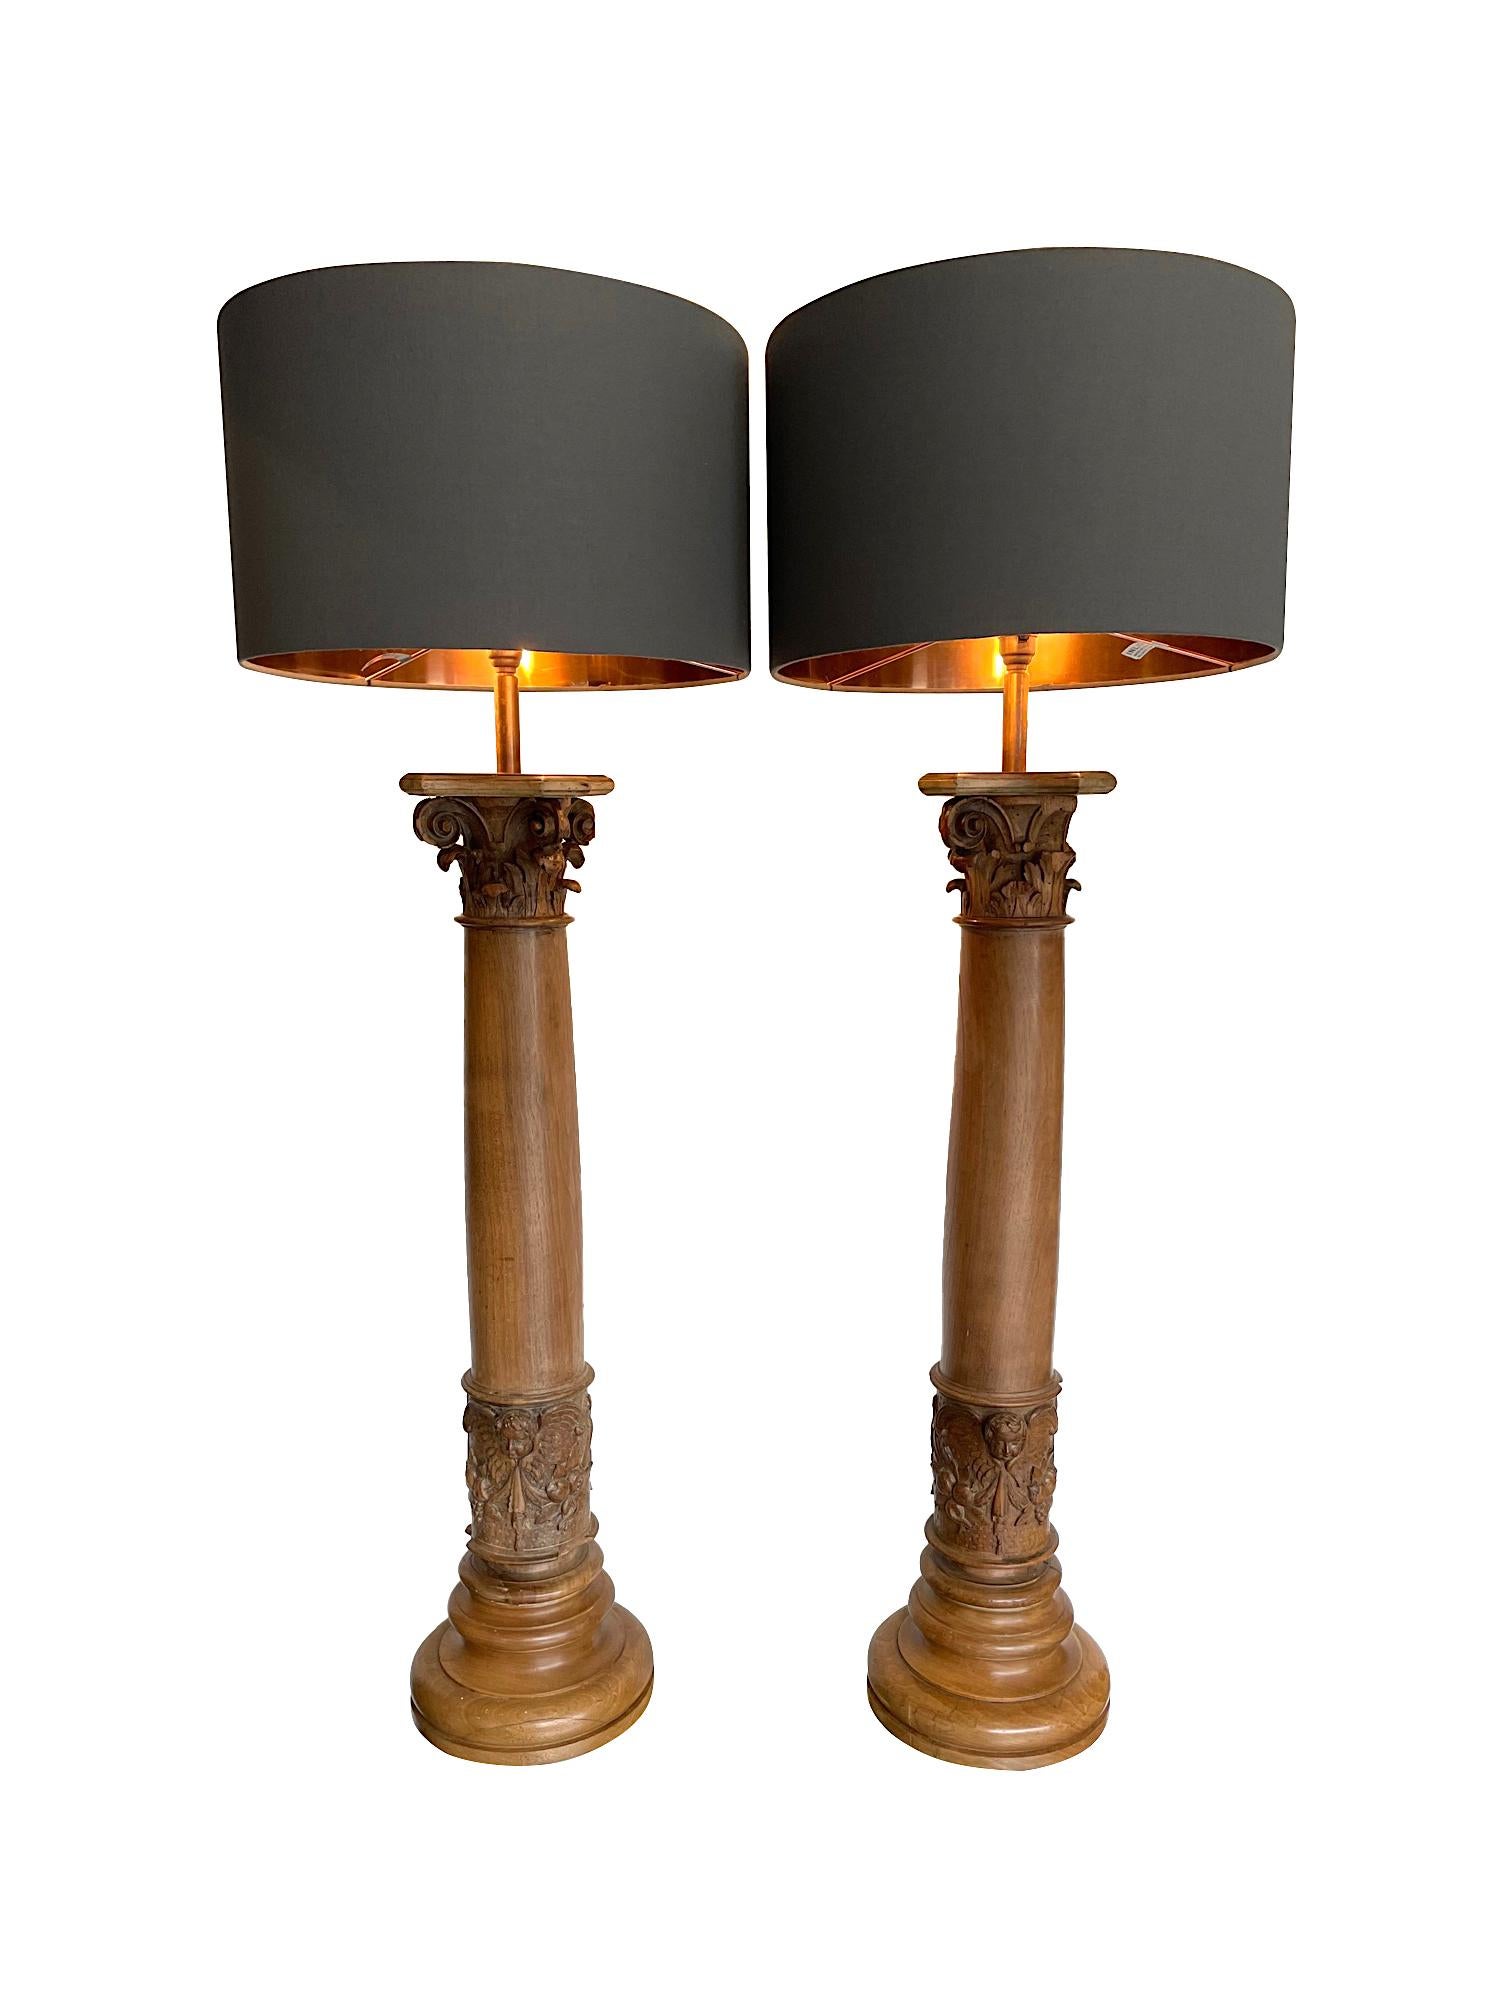 A large pair of 19th century oak Corinthian column lamps with central hand carved cherubs head and flower freize. The orignal 19th century columns have been converted later into lamps. Re wired with new brass fittings and antique gold cord flex.